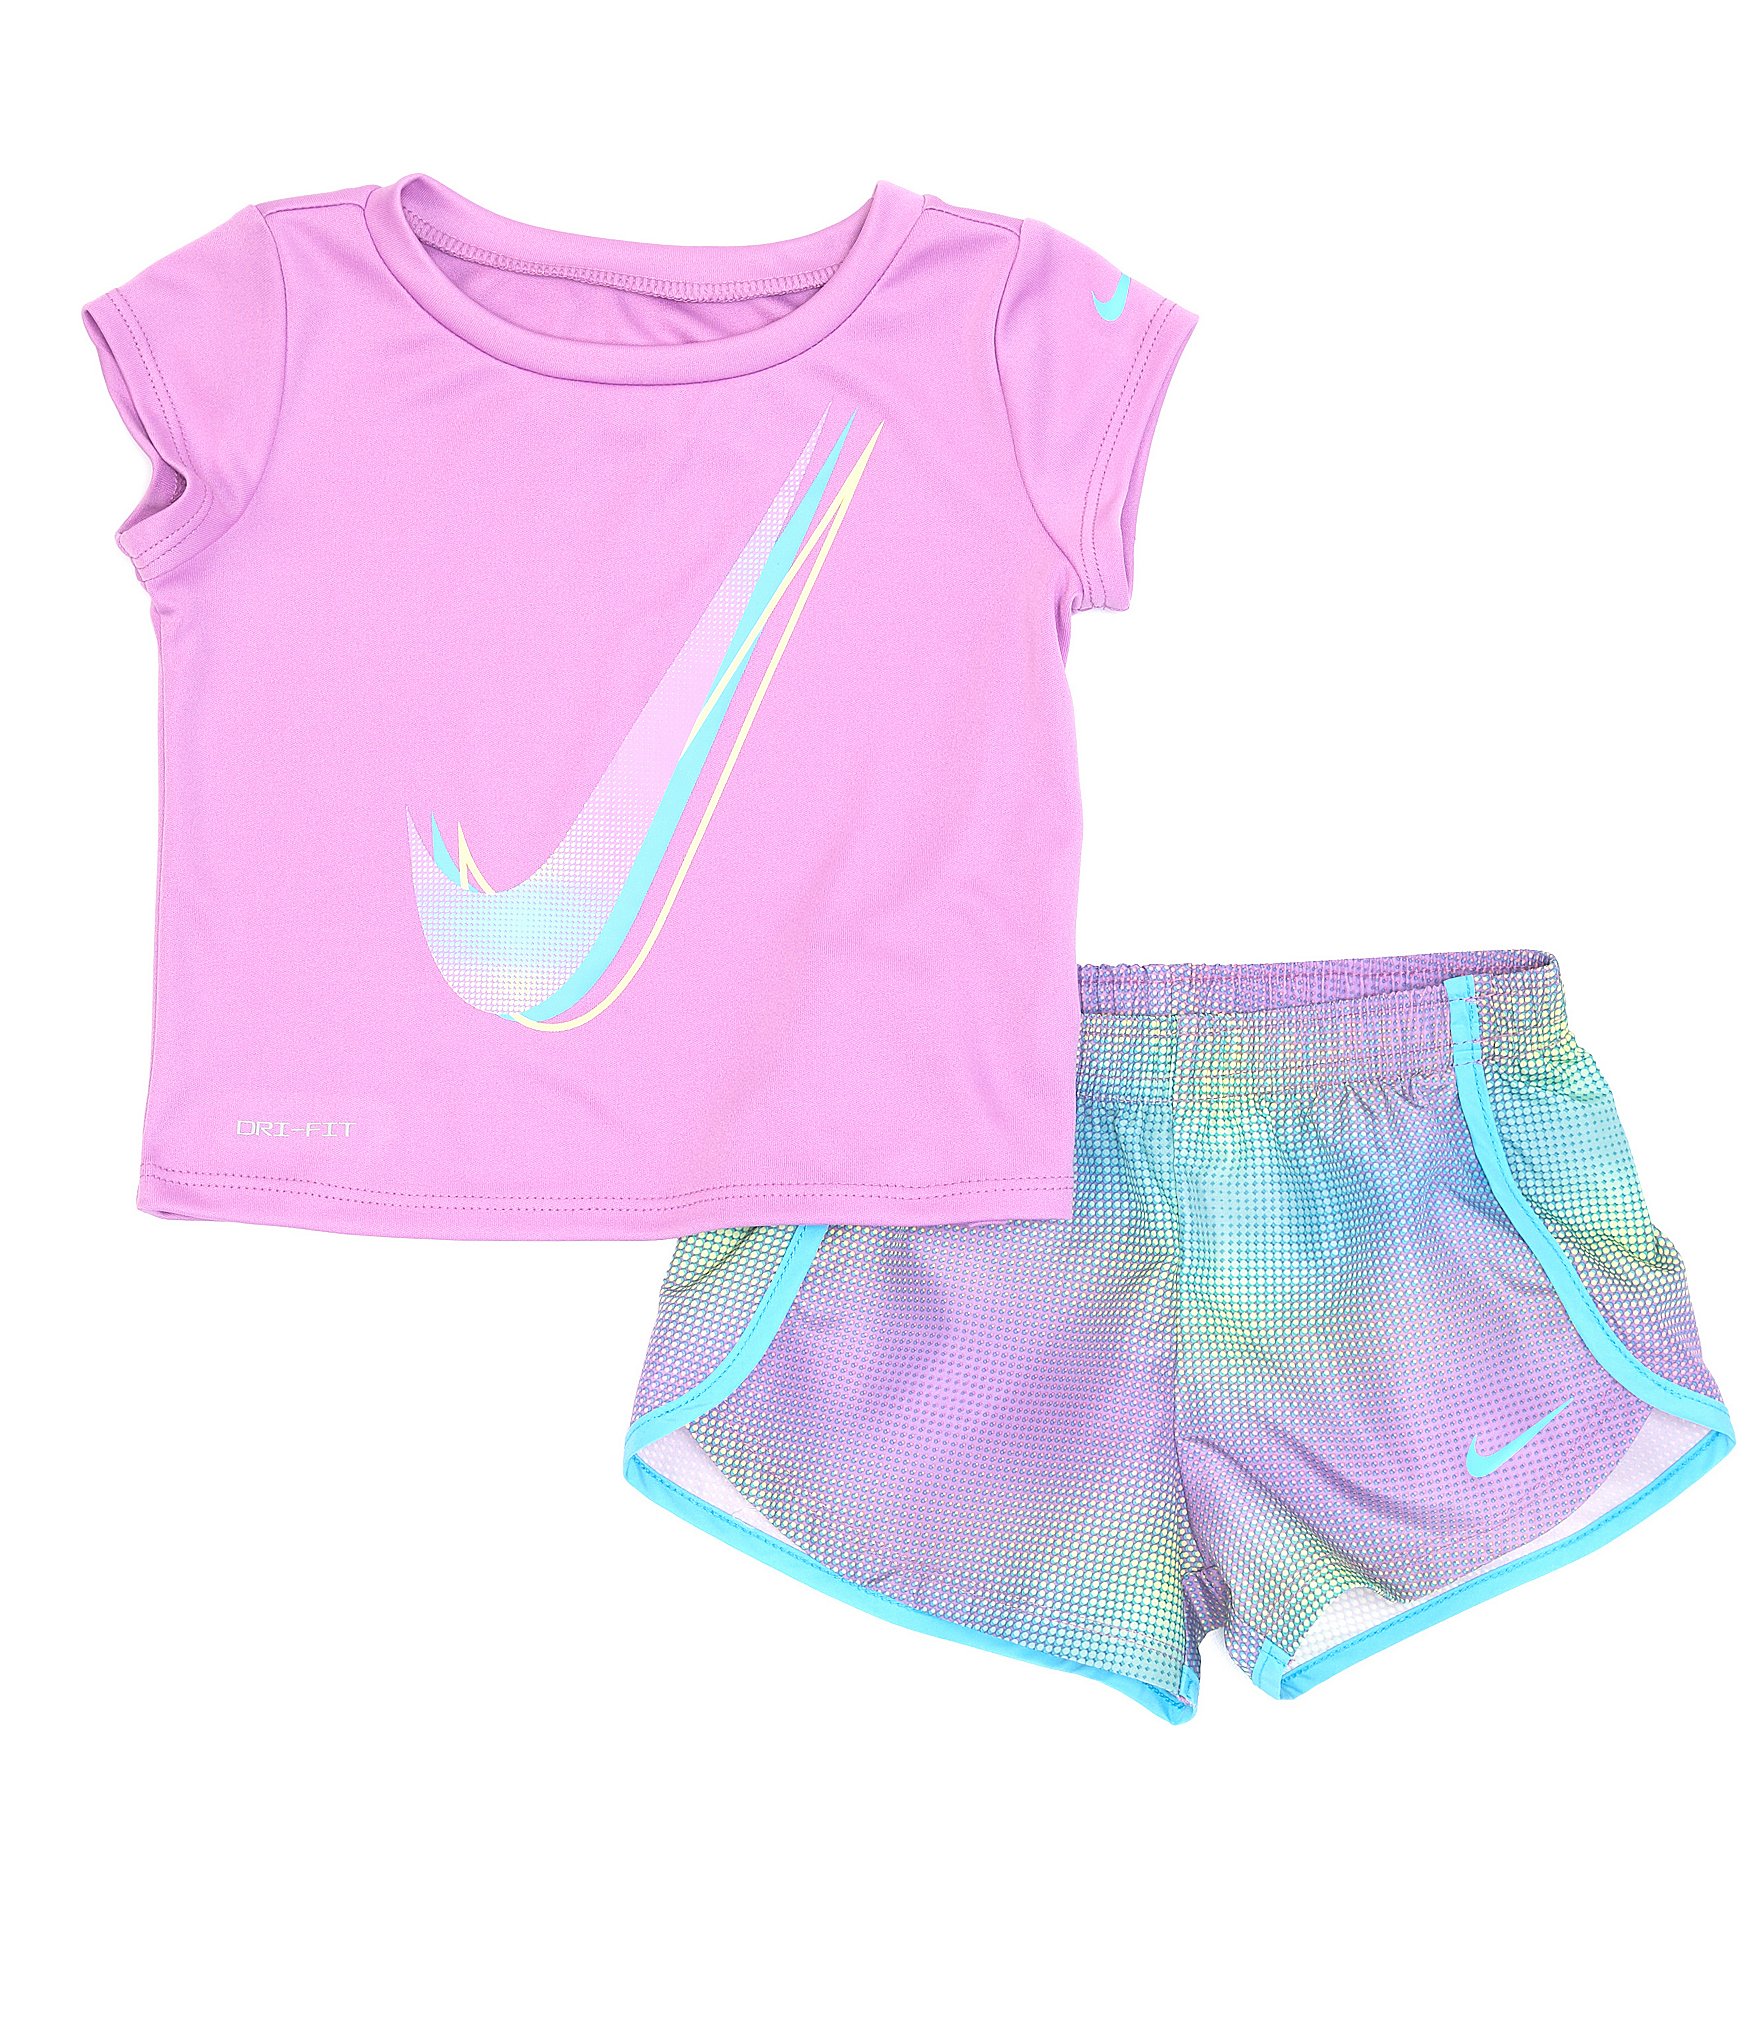 Nike baby girl outfit 2 piece sets t-shirt/underwear Color Violet Shock